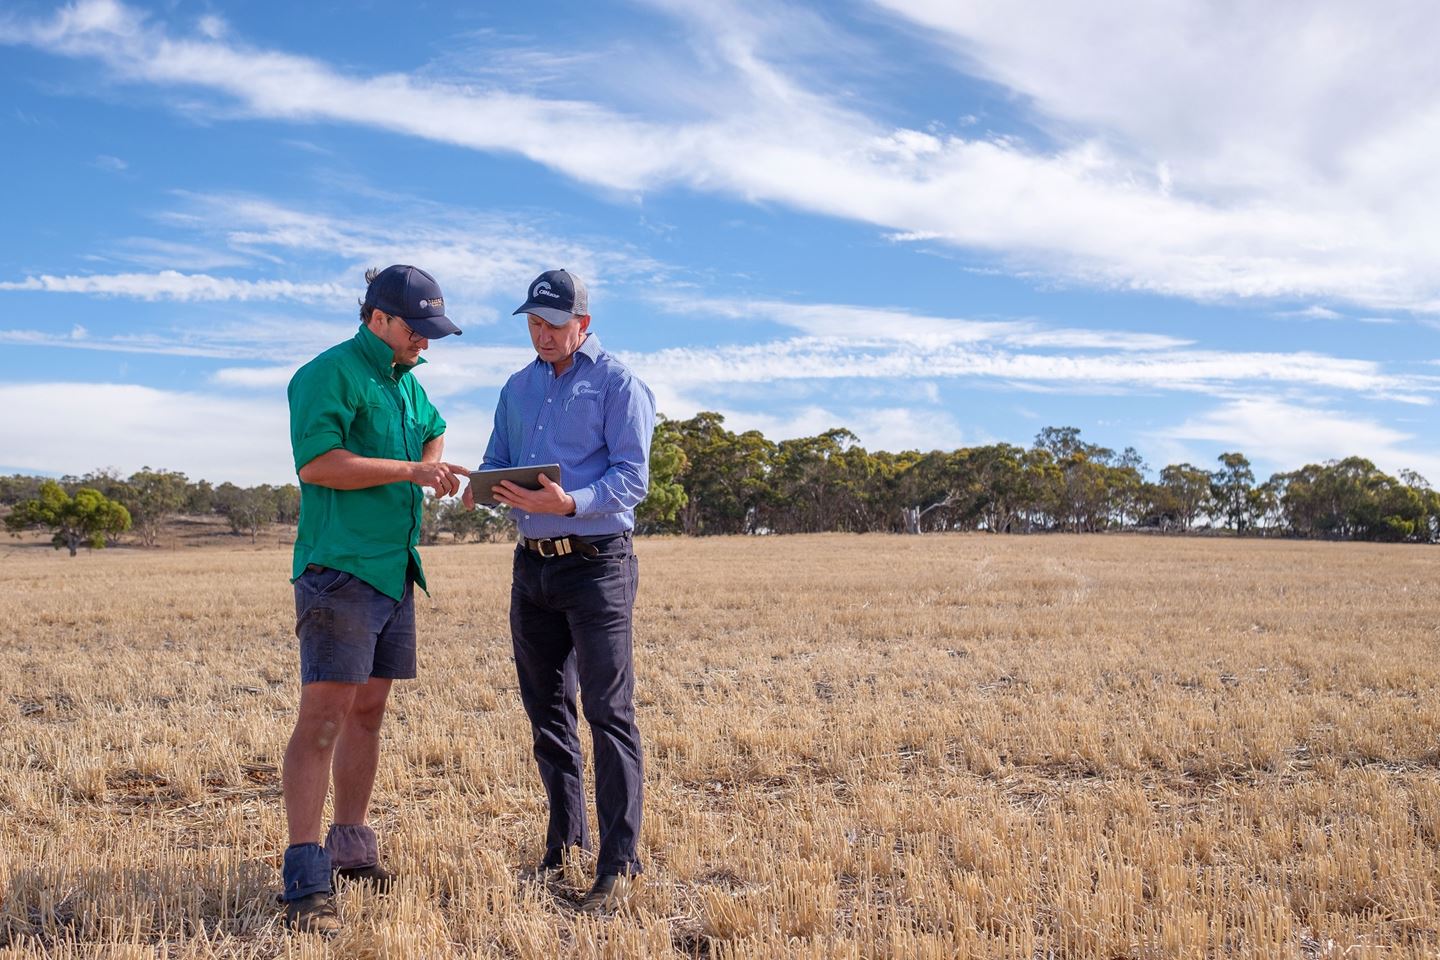 Two men wearing caps stand in a brown paddock looking at an ipad together